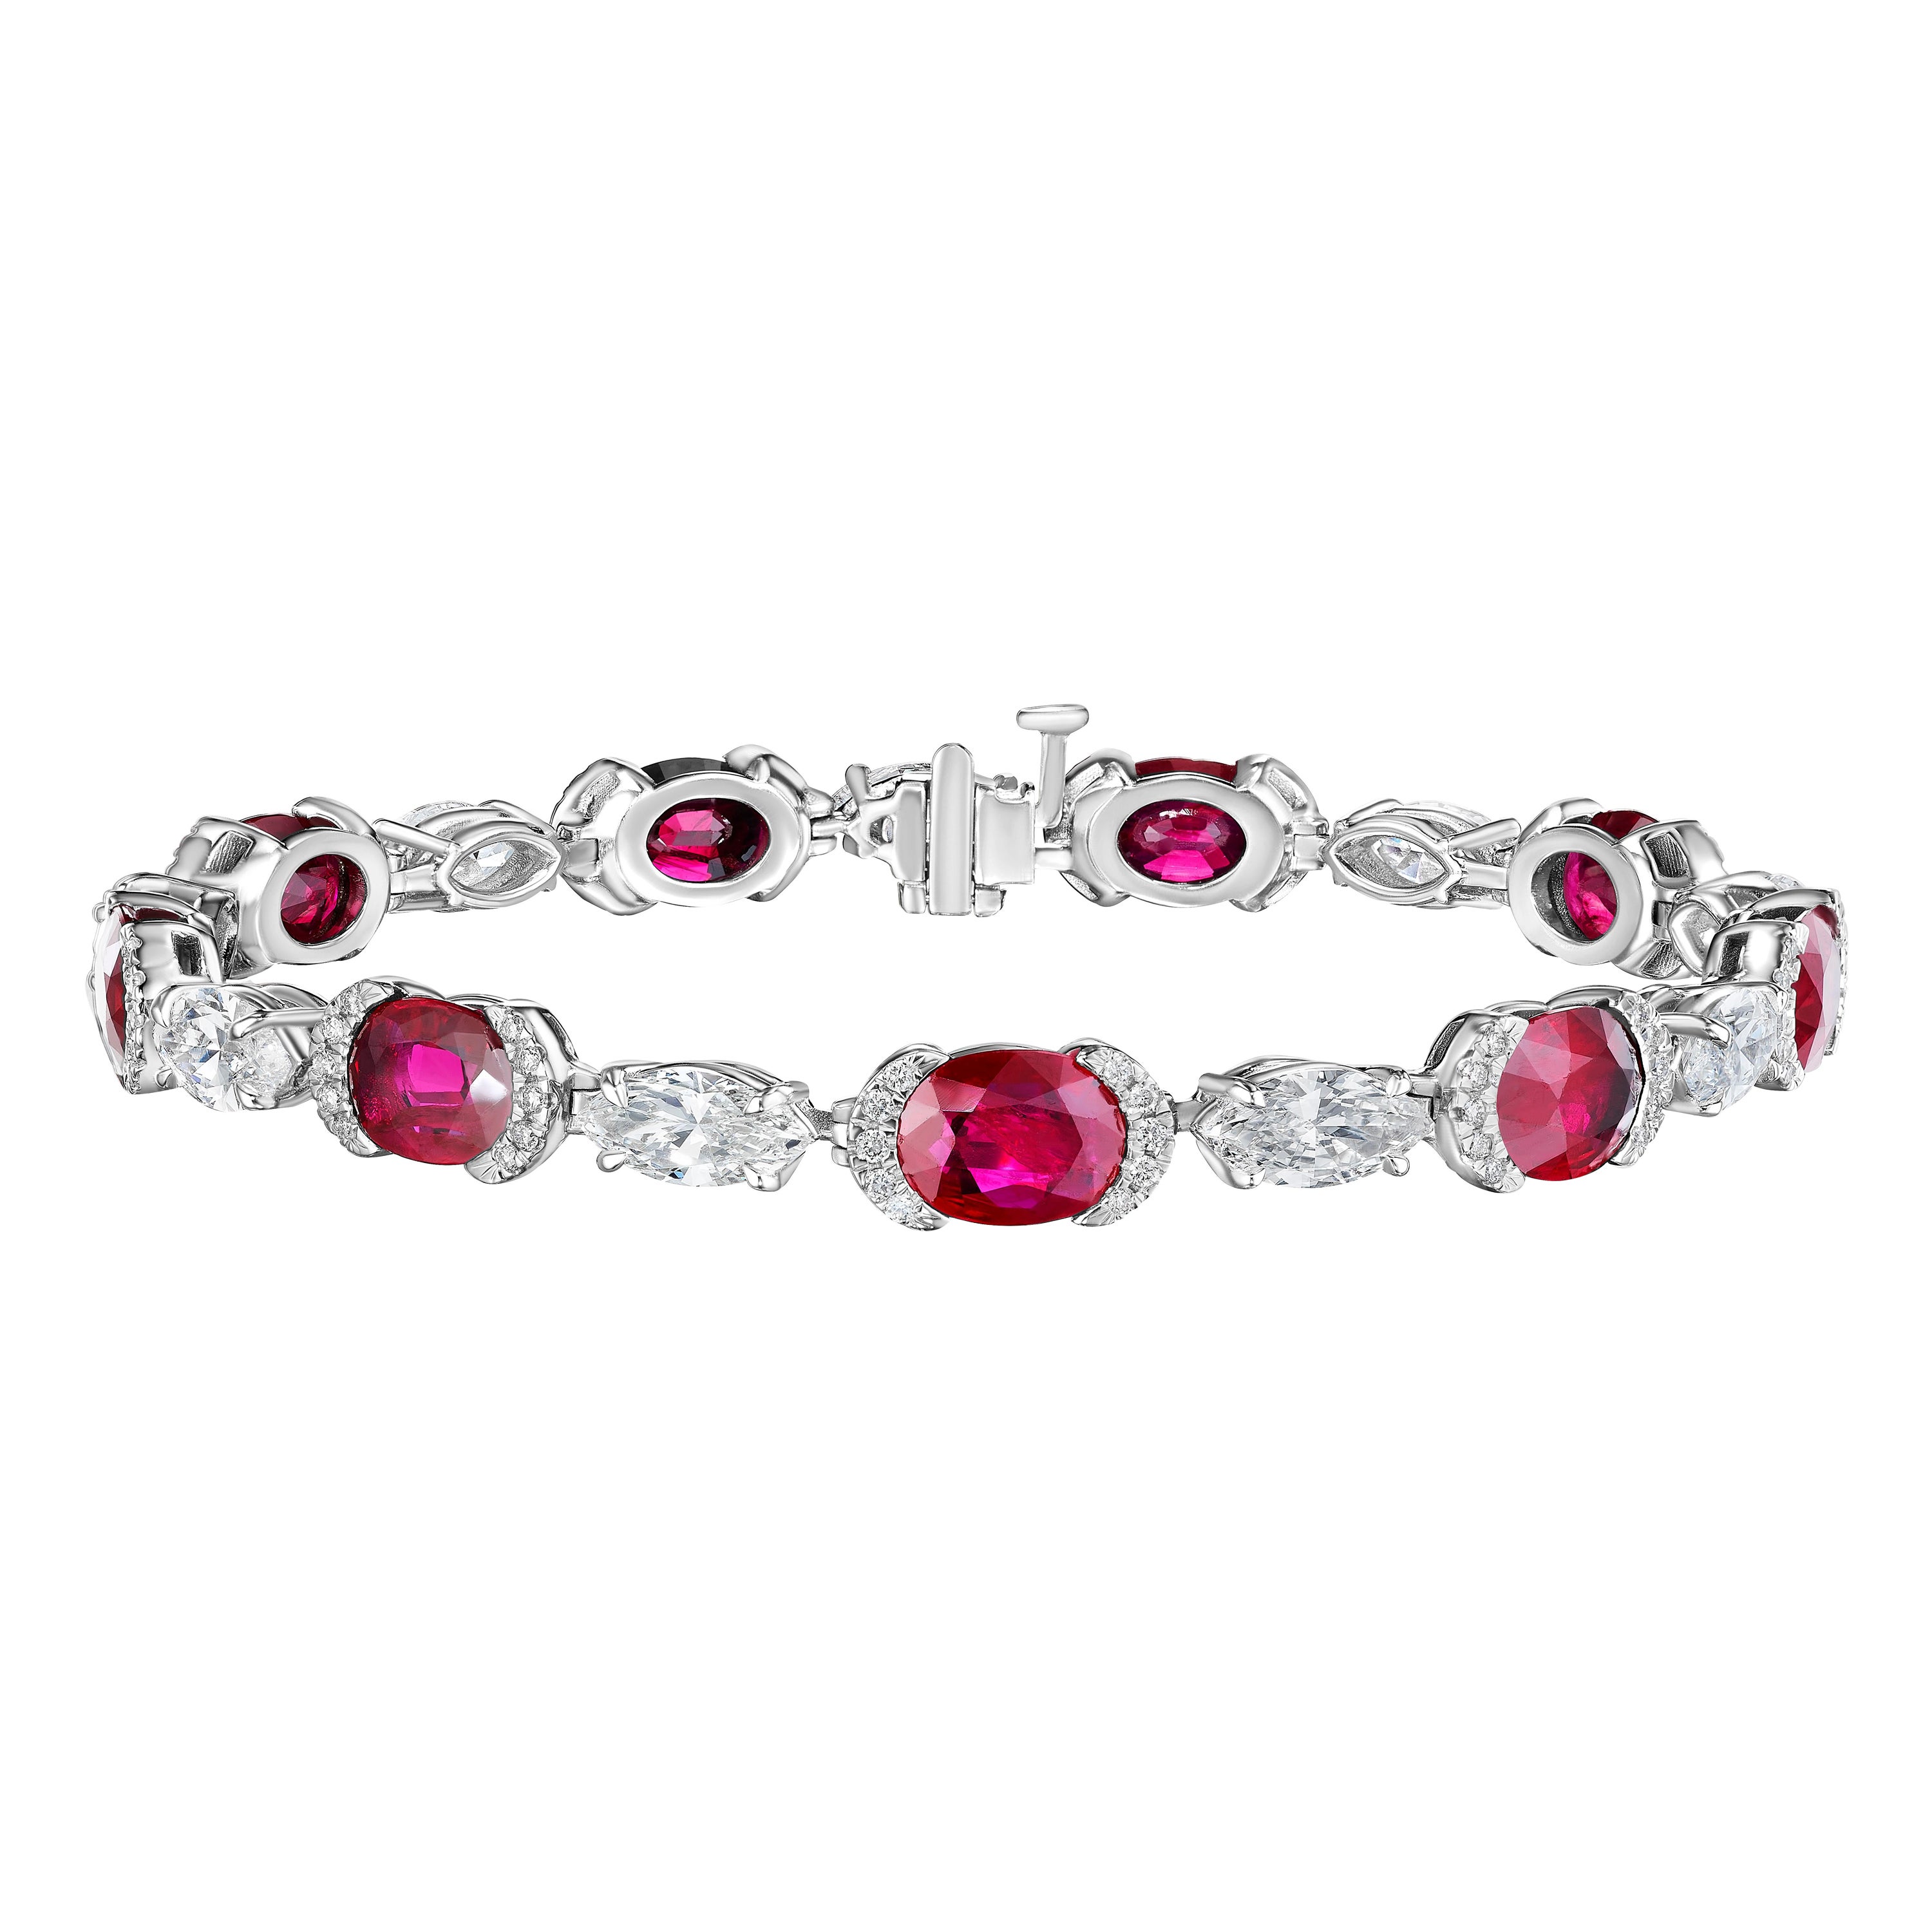 Oval Ruby and Marquise Diamond Bracelet